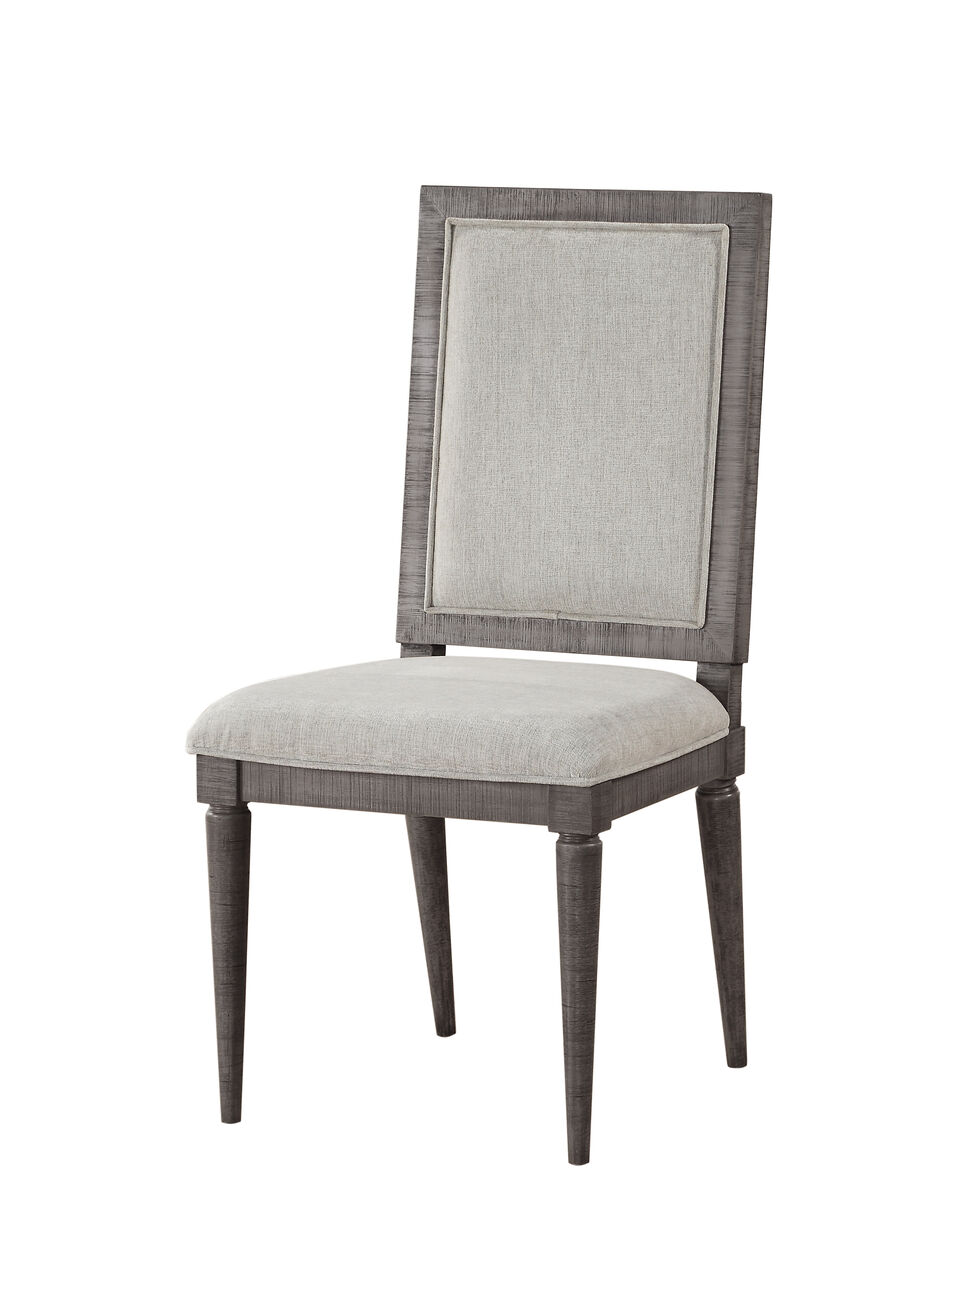 Fabric Upholstered Wooden Side Chair with Cushioned Seating and Tapered Legs, Set of 2, Gray